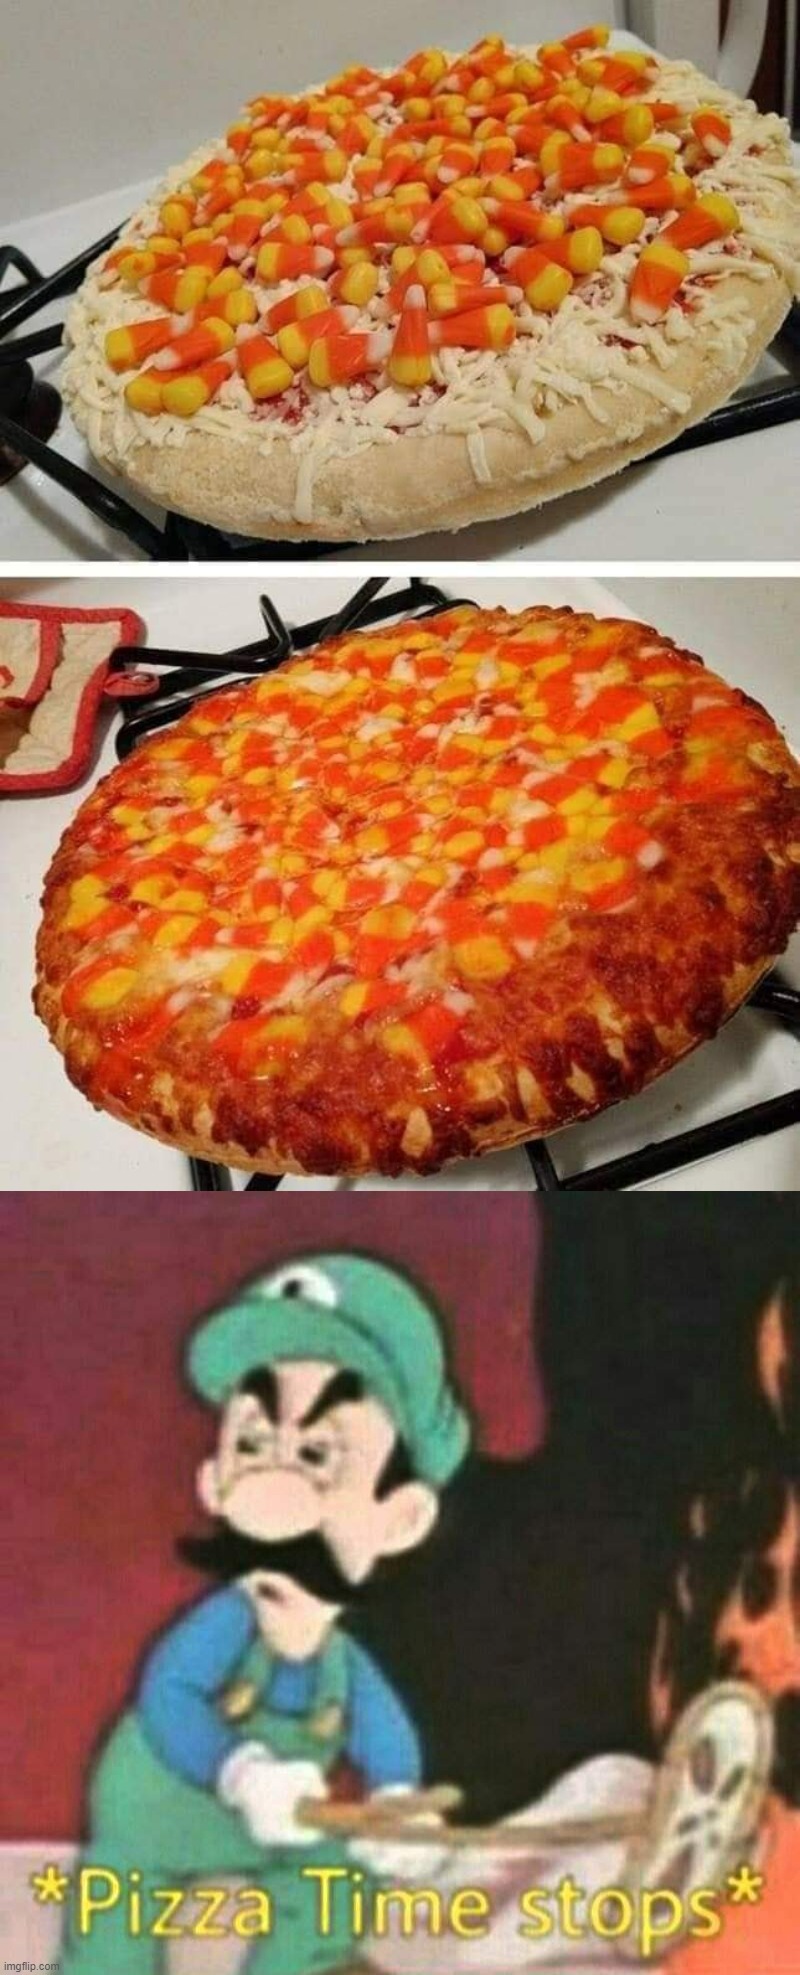 Average disgusting pizza meme | image tagged in candy corn pizza,pizza time stops | made w/ Imgflip meme maker